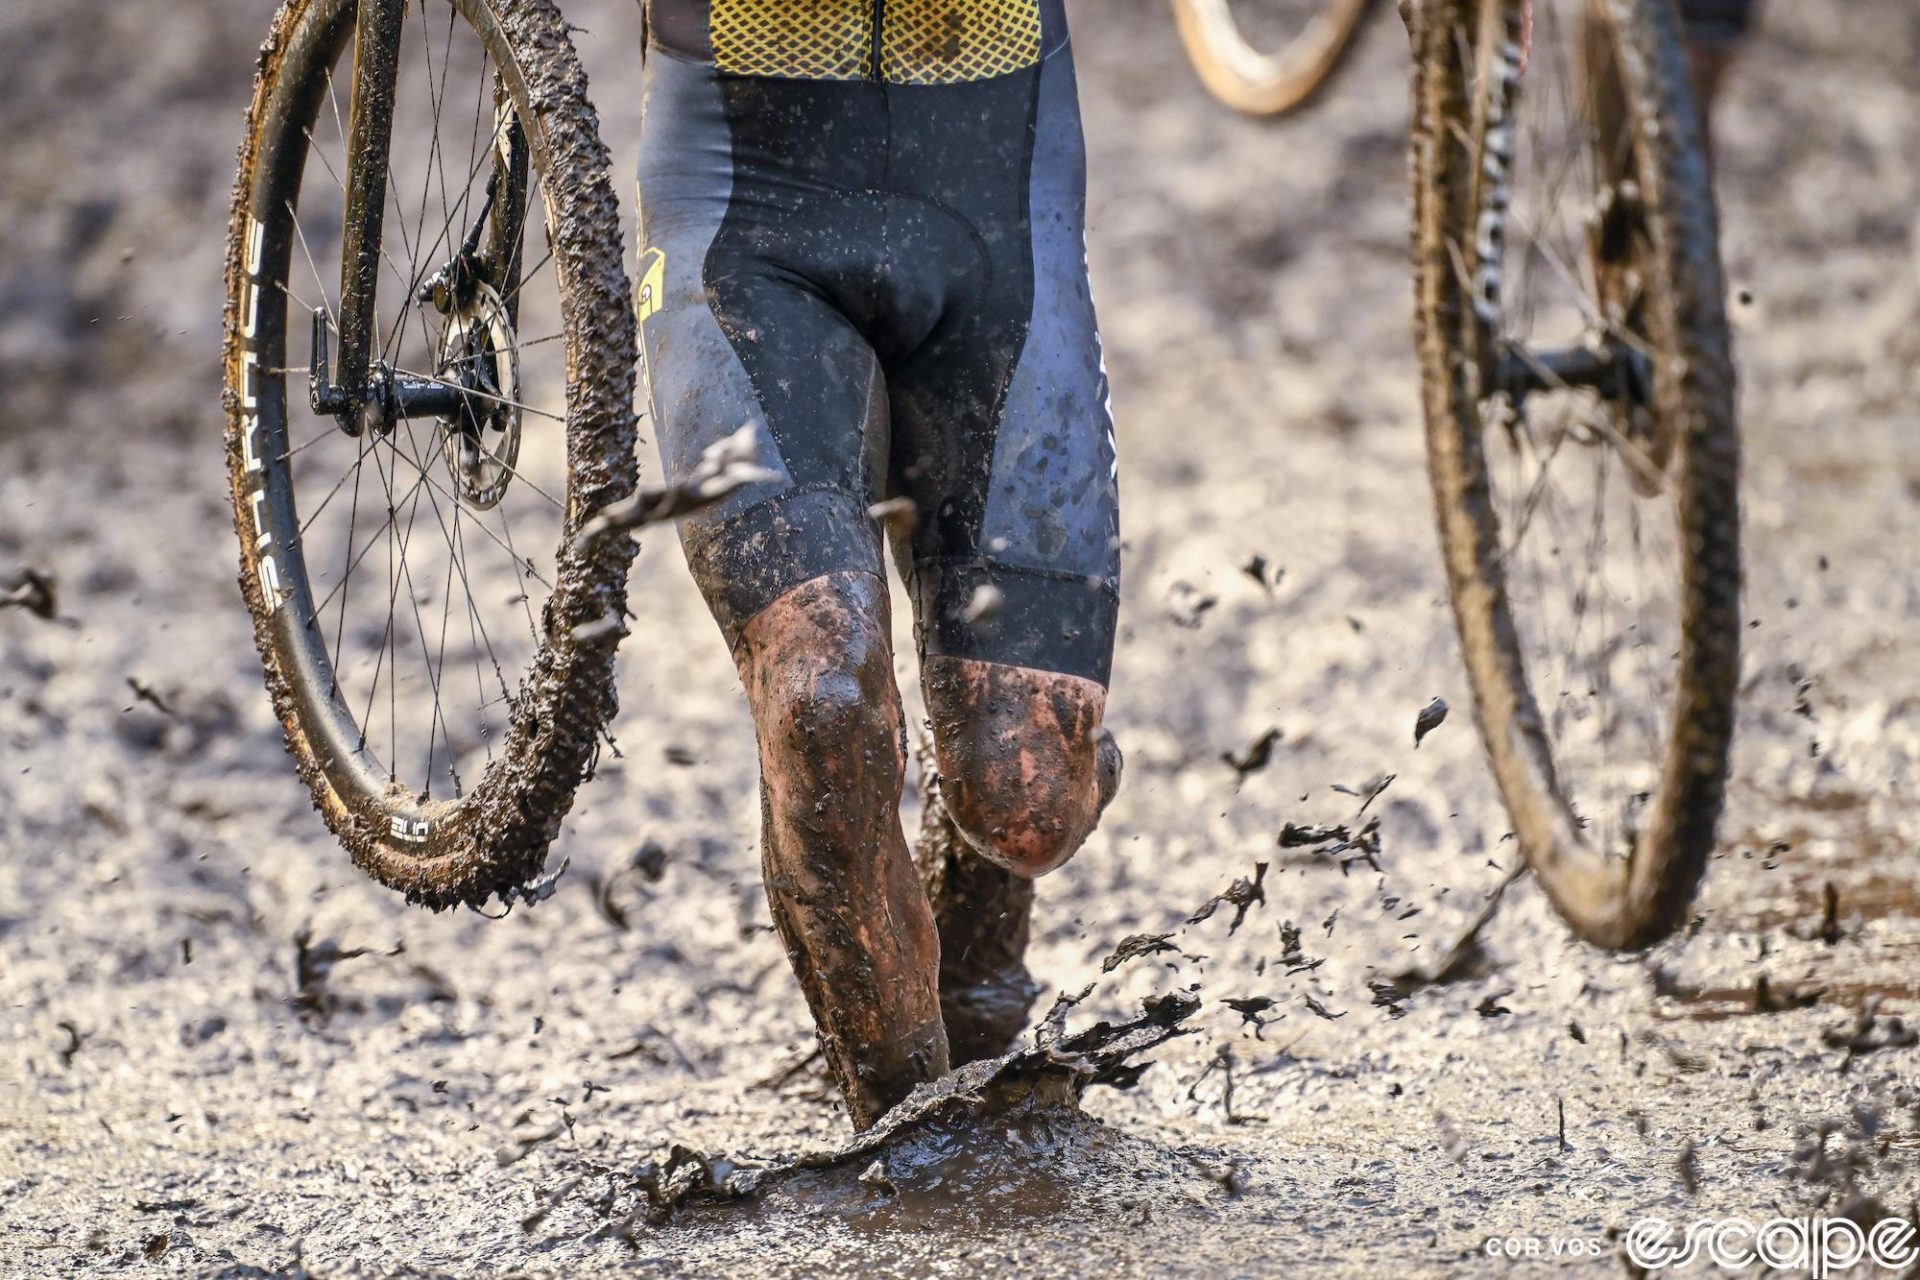 A rider is shown in closeup at the Superprestige CX in Niel. His knees and lower legs are visible with parts of two wheels as mud flies up from his footsteps.